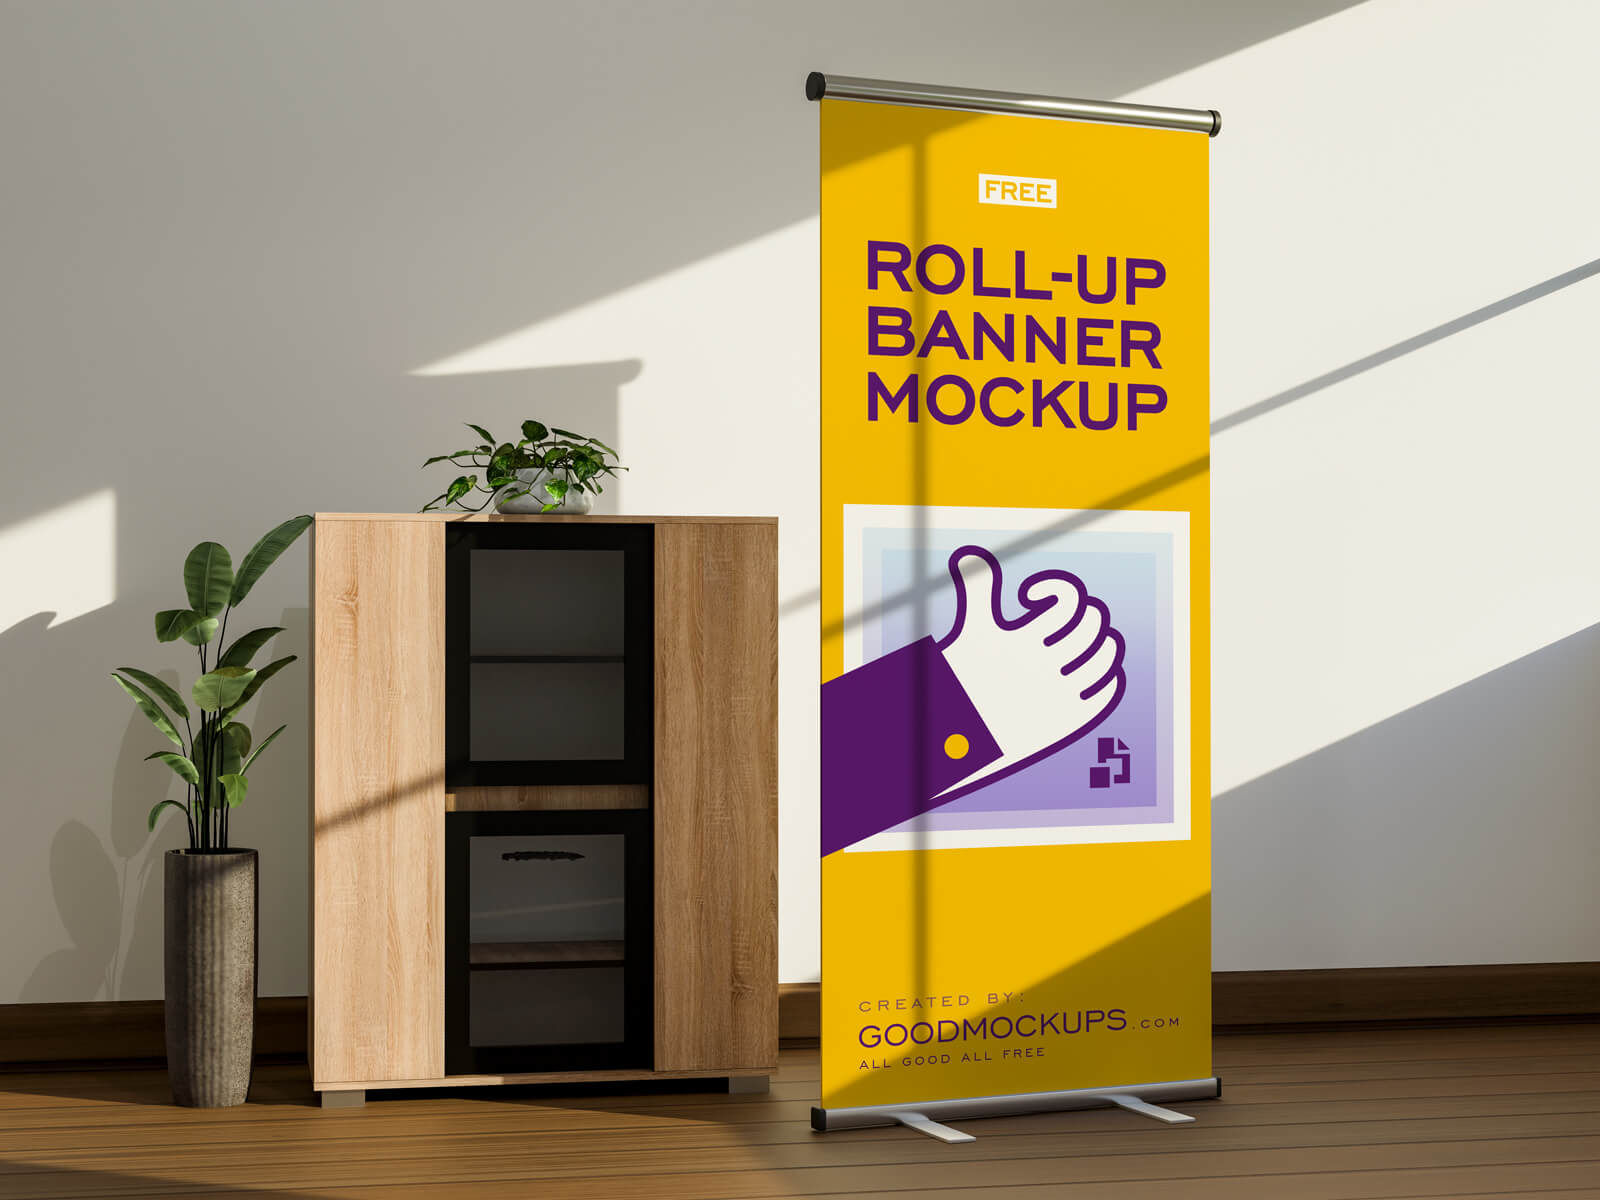 Free-Shadow-Overlay-Roll-up-Banner-Stand-Mockup-PSD